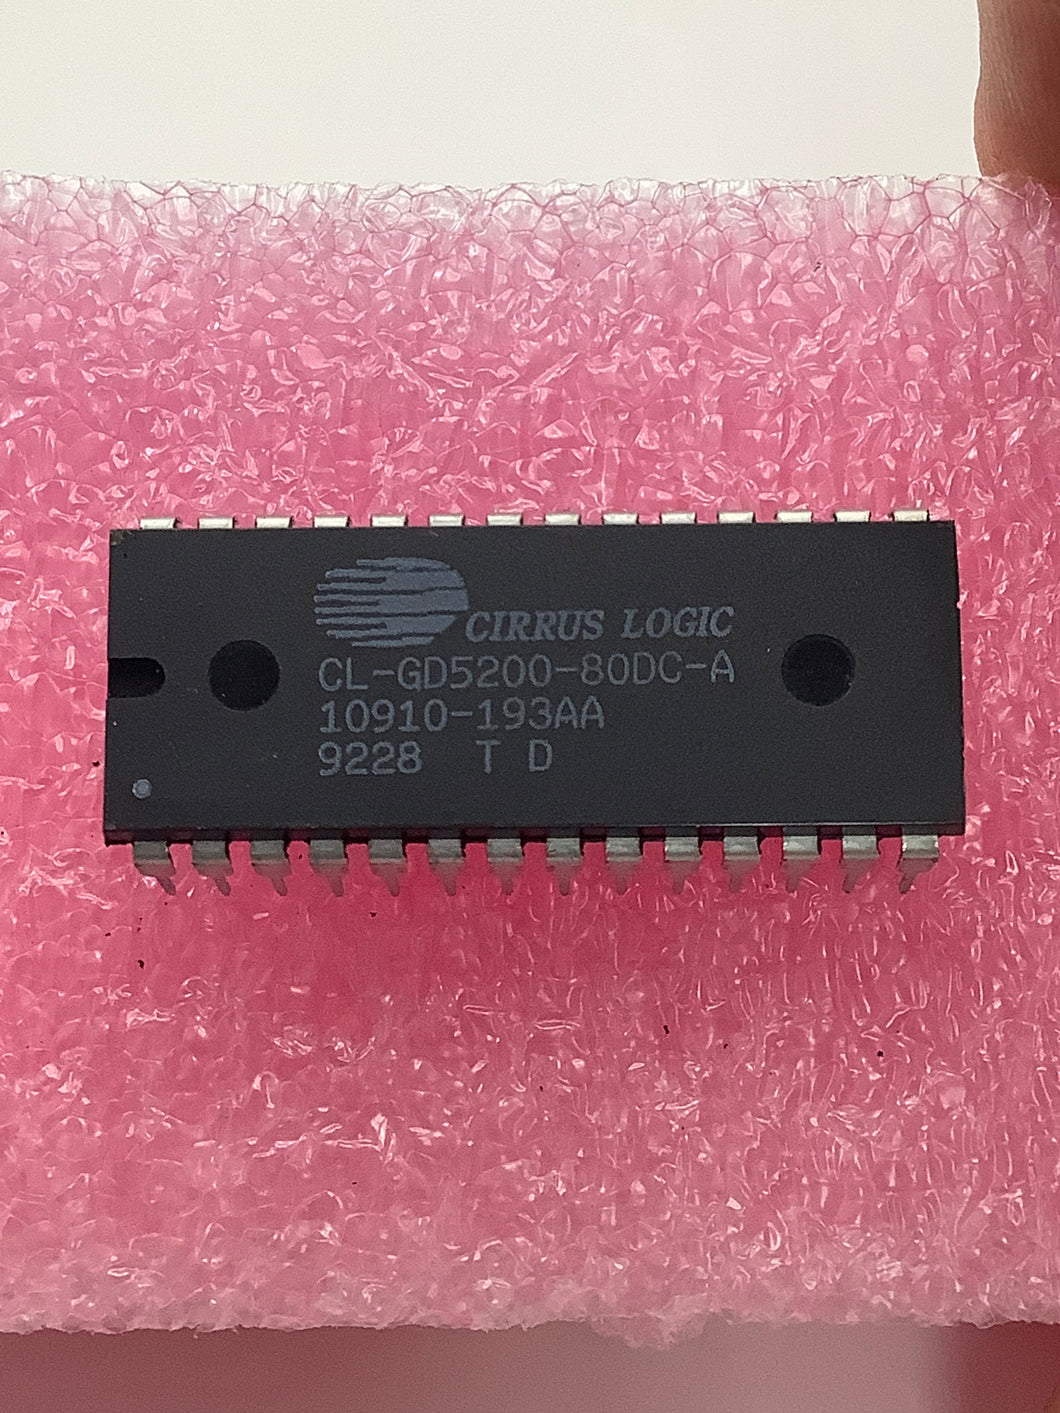 CL-GD5200-80DC-A - CIRRUS LOGIC - Video DAC with Color Palette (RAMDAC)